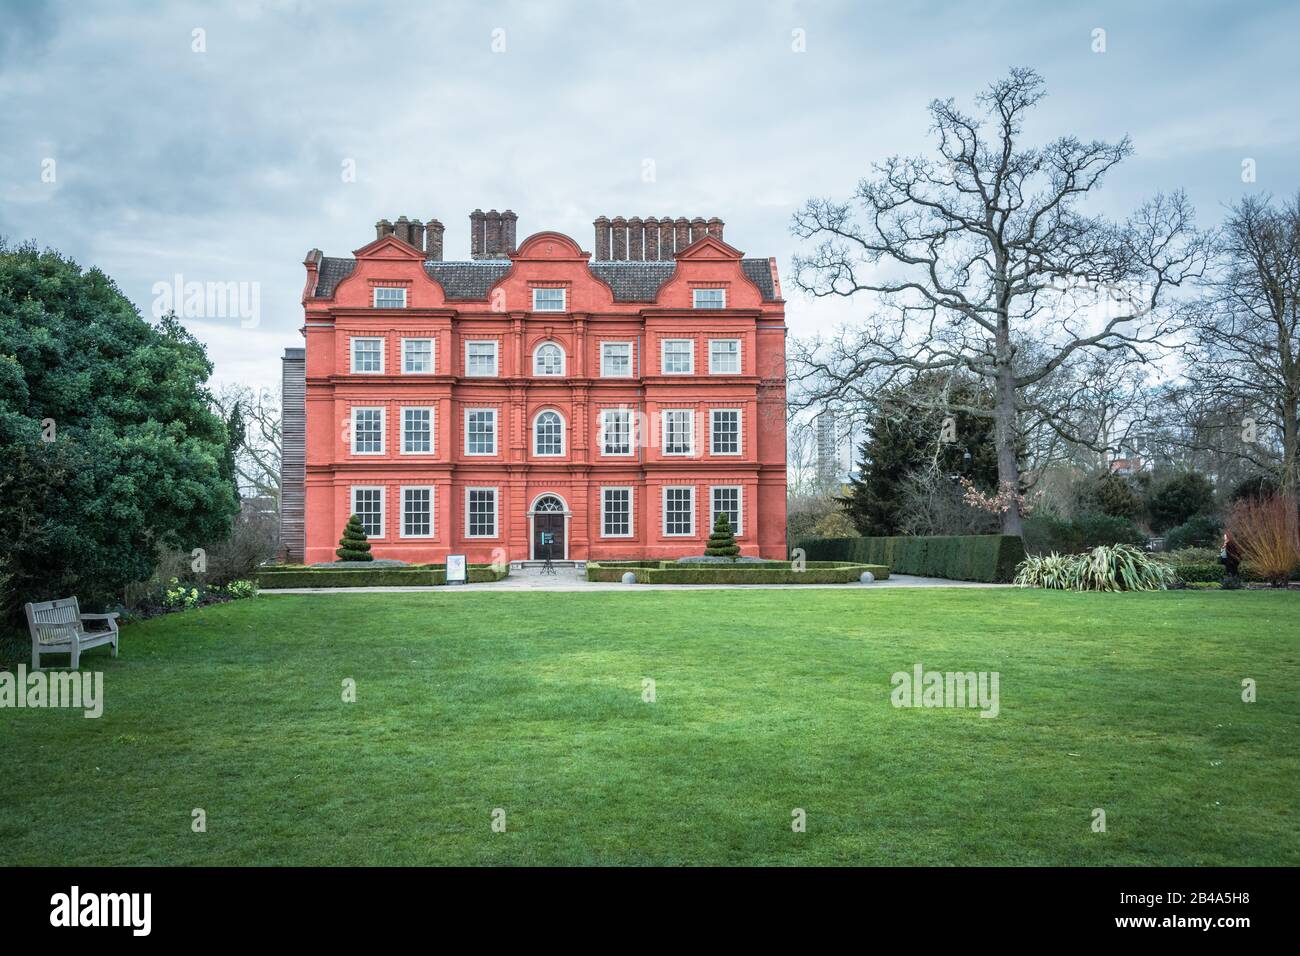 Kew Palace the summer home of King George III - a British royal palace in Kew Gardens on the banks of the River Thames, London, UK Stock Photo